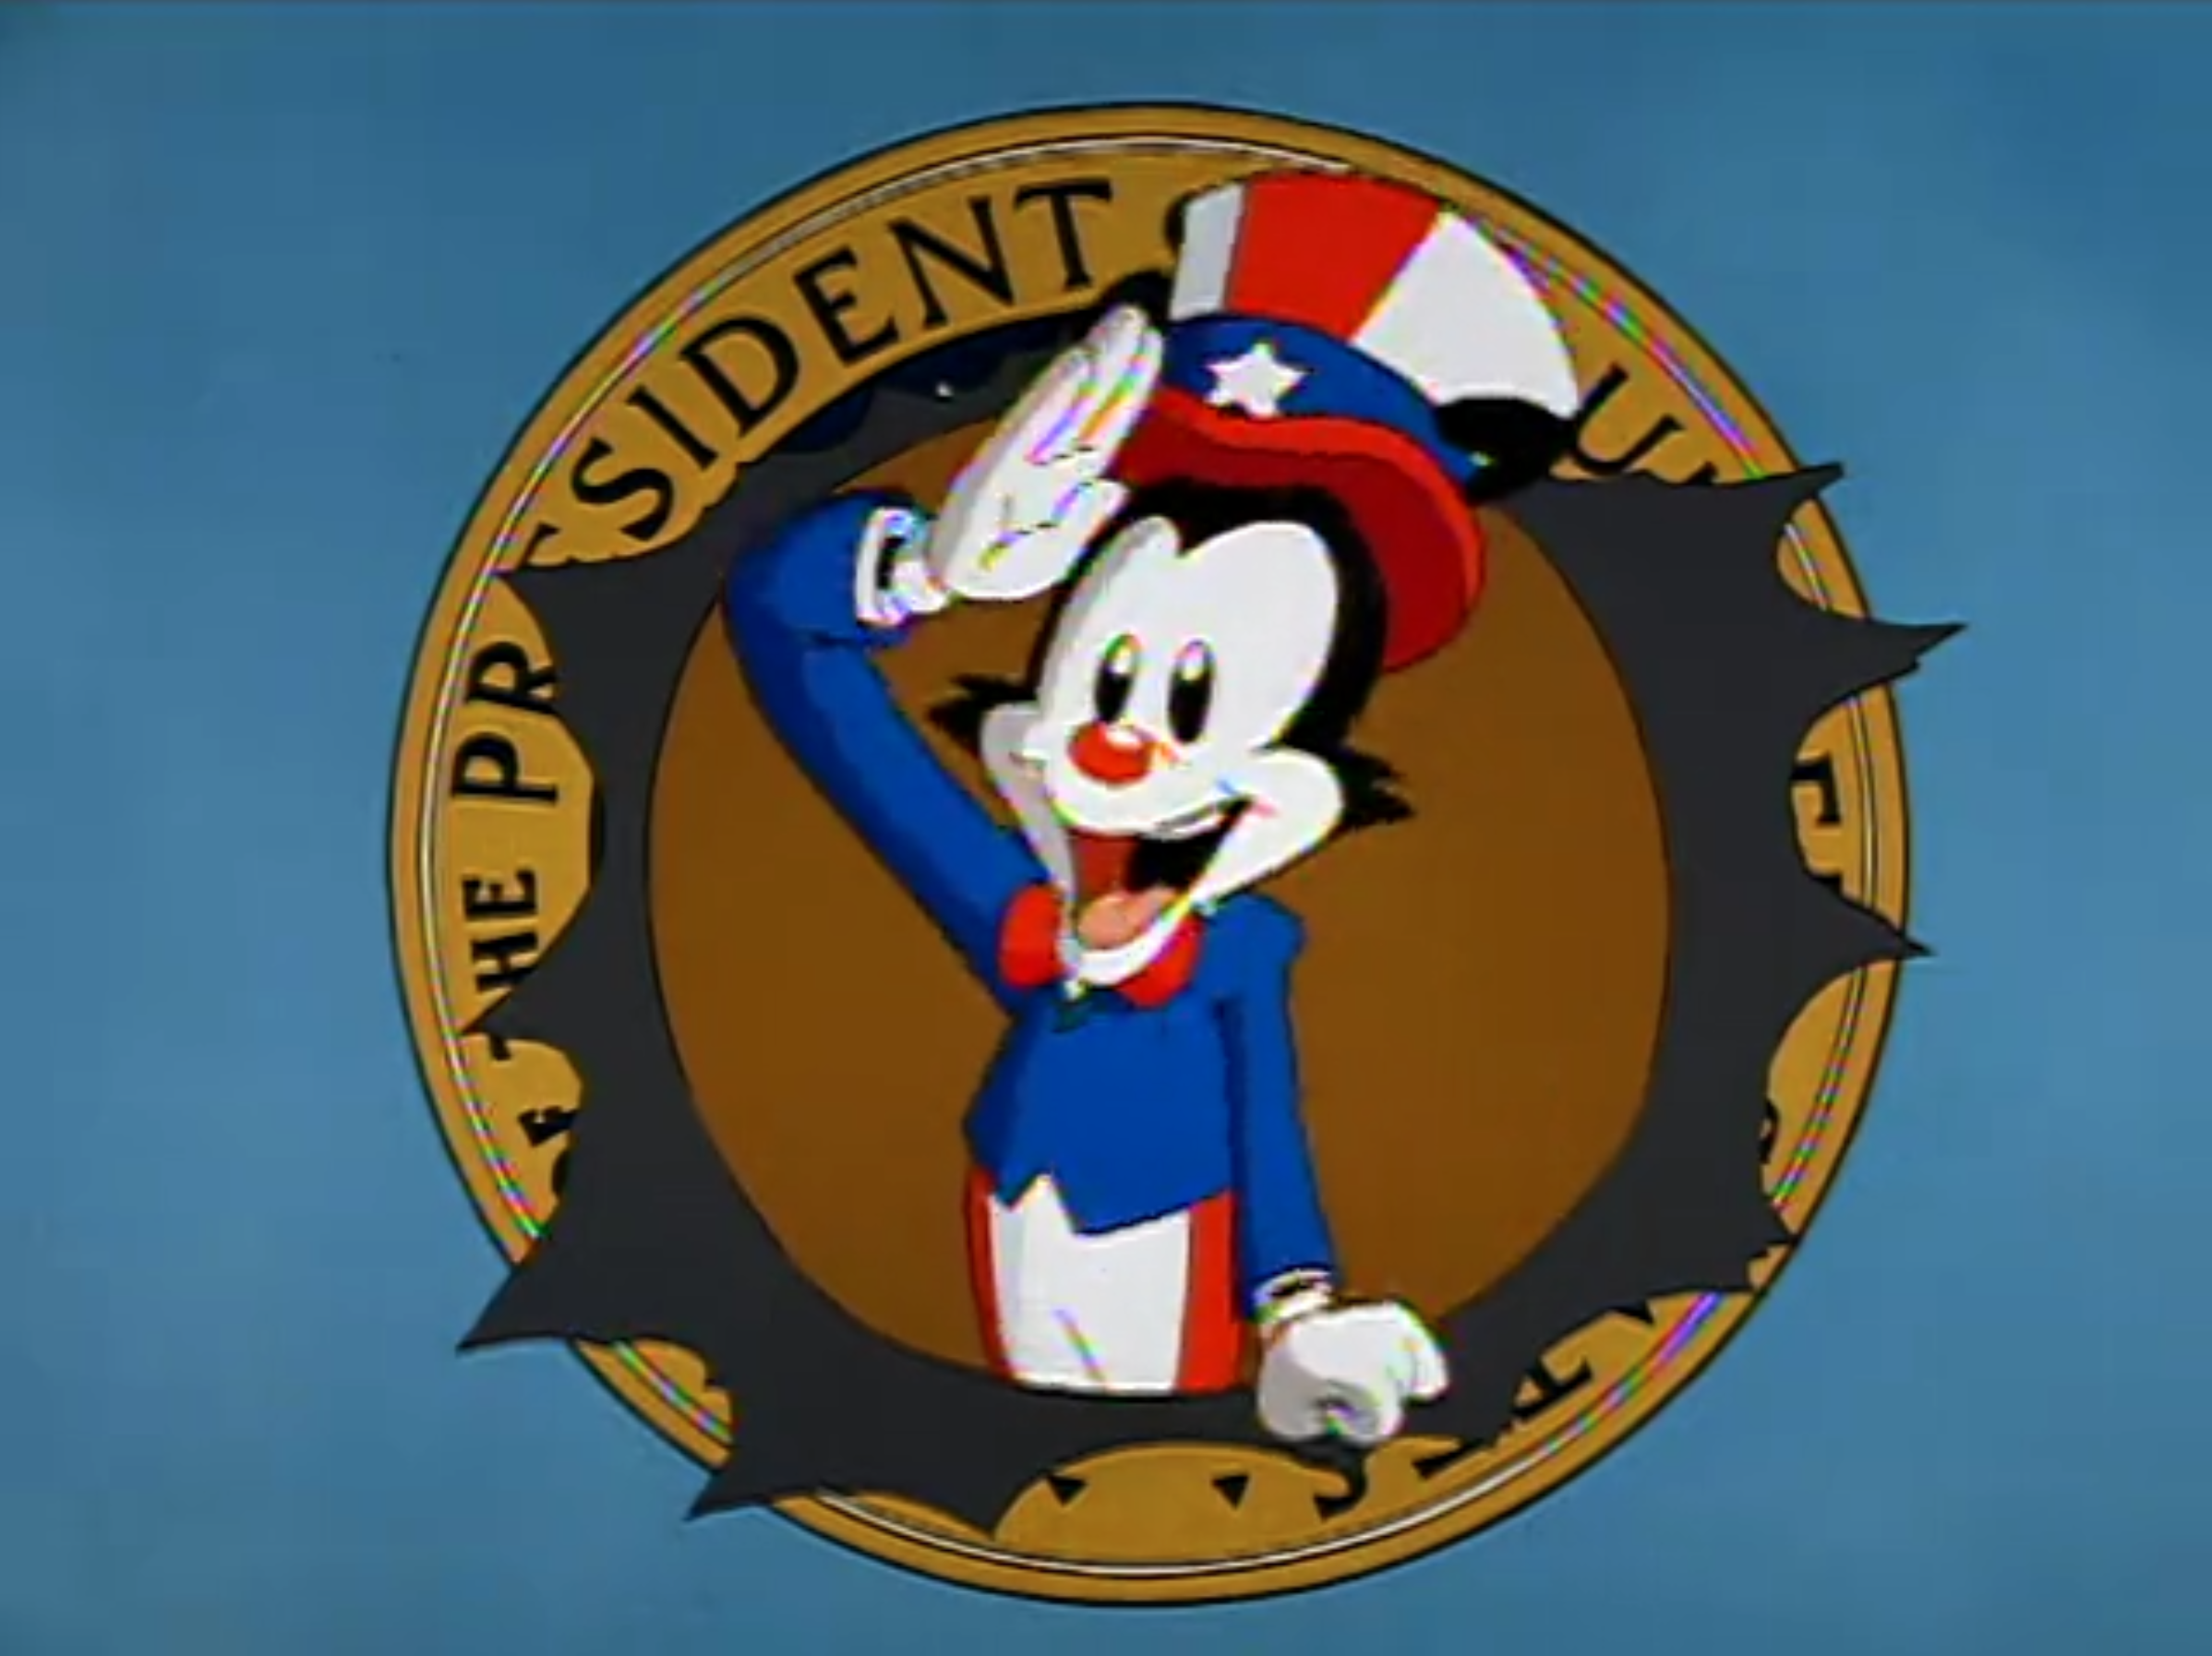 https://static.wikia.nocookie.net/animaniacs/images/5/5a/Presidentssong.png/revision/latest?cb=20211206163845